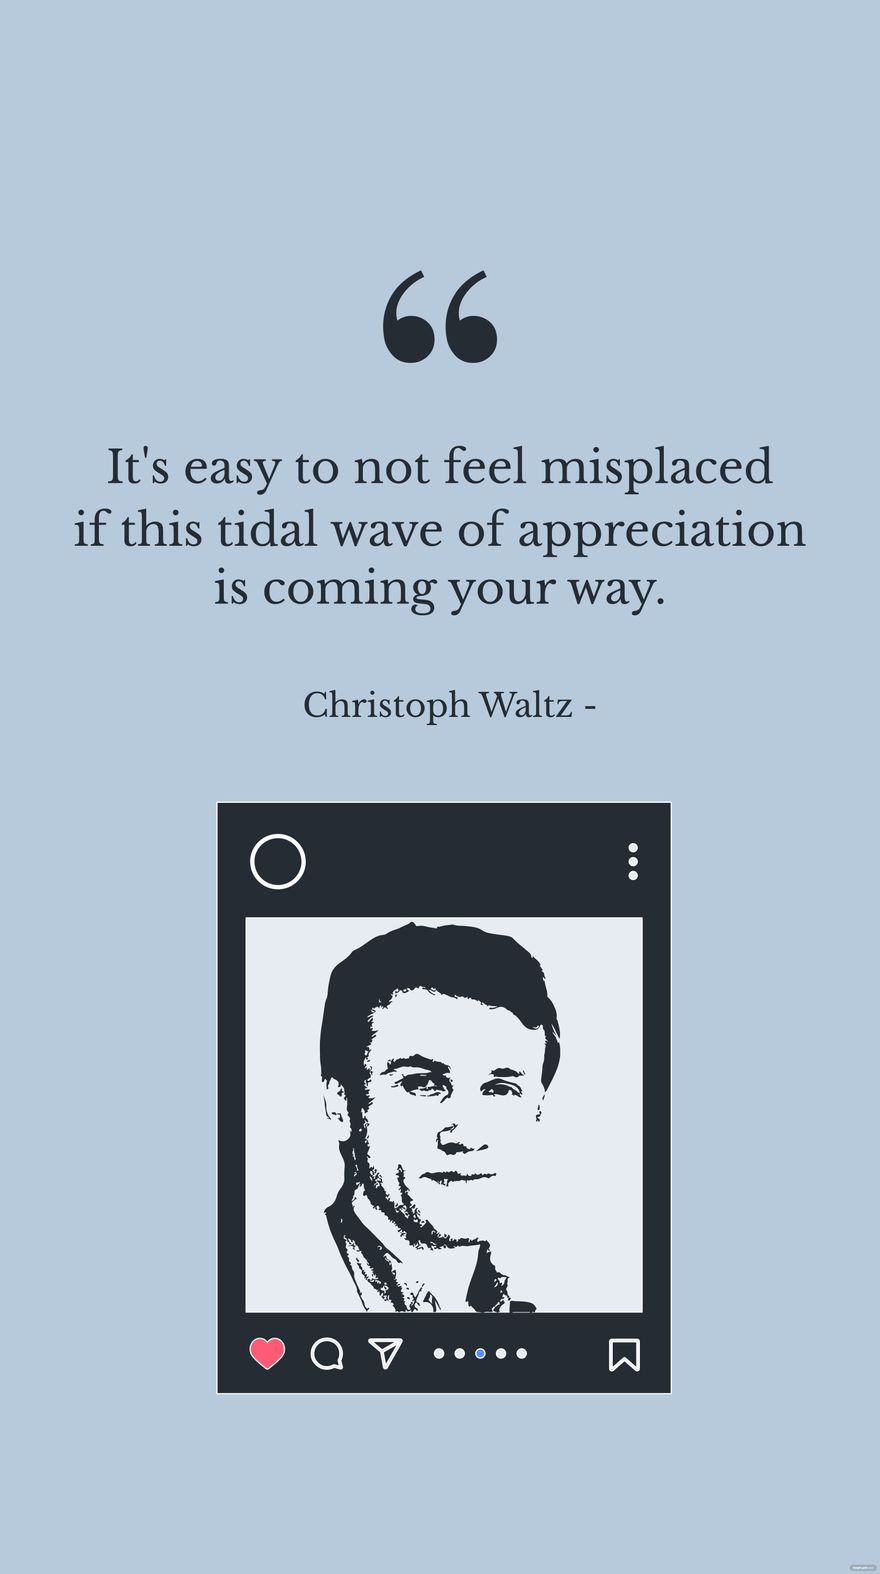 Free Christoph Waltz - It's easy to not feel misplaced if this tidal wave of appreciation is coming your way. in JPG